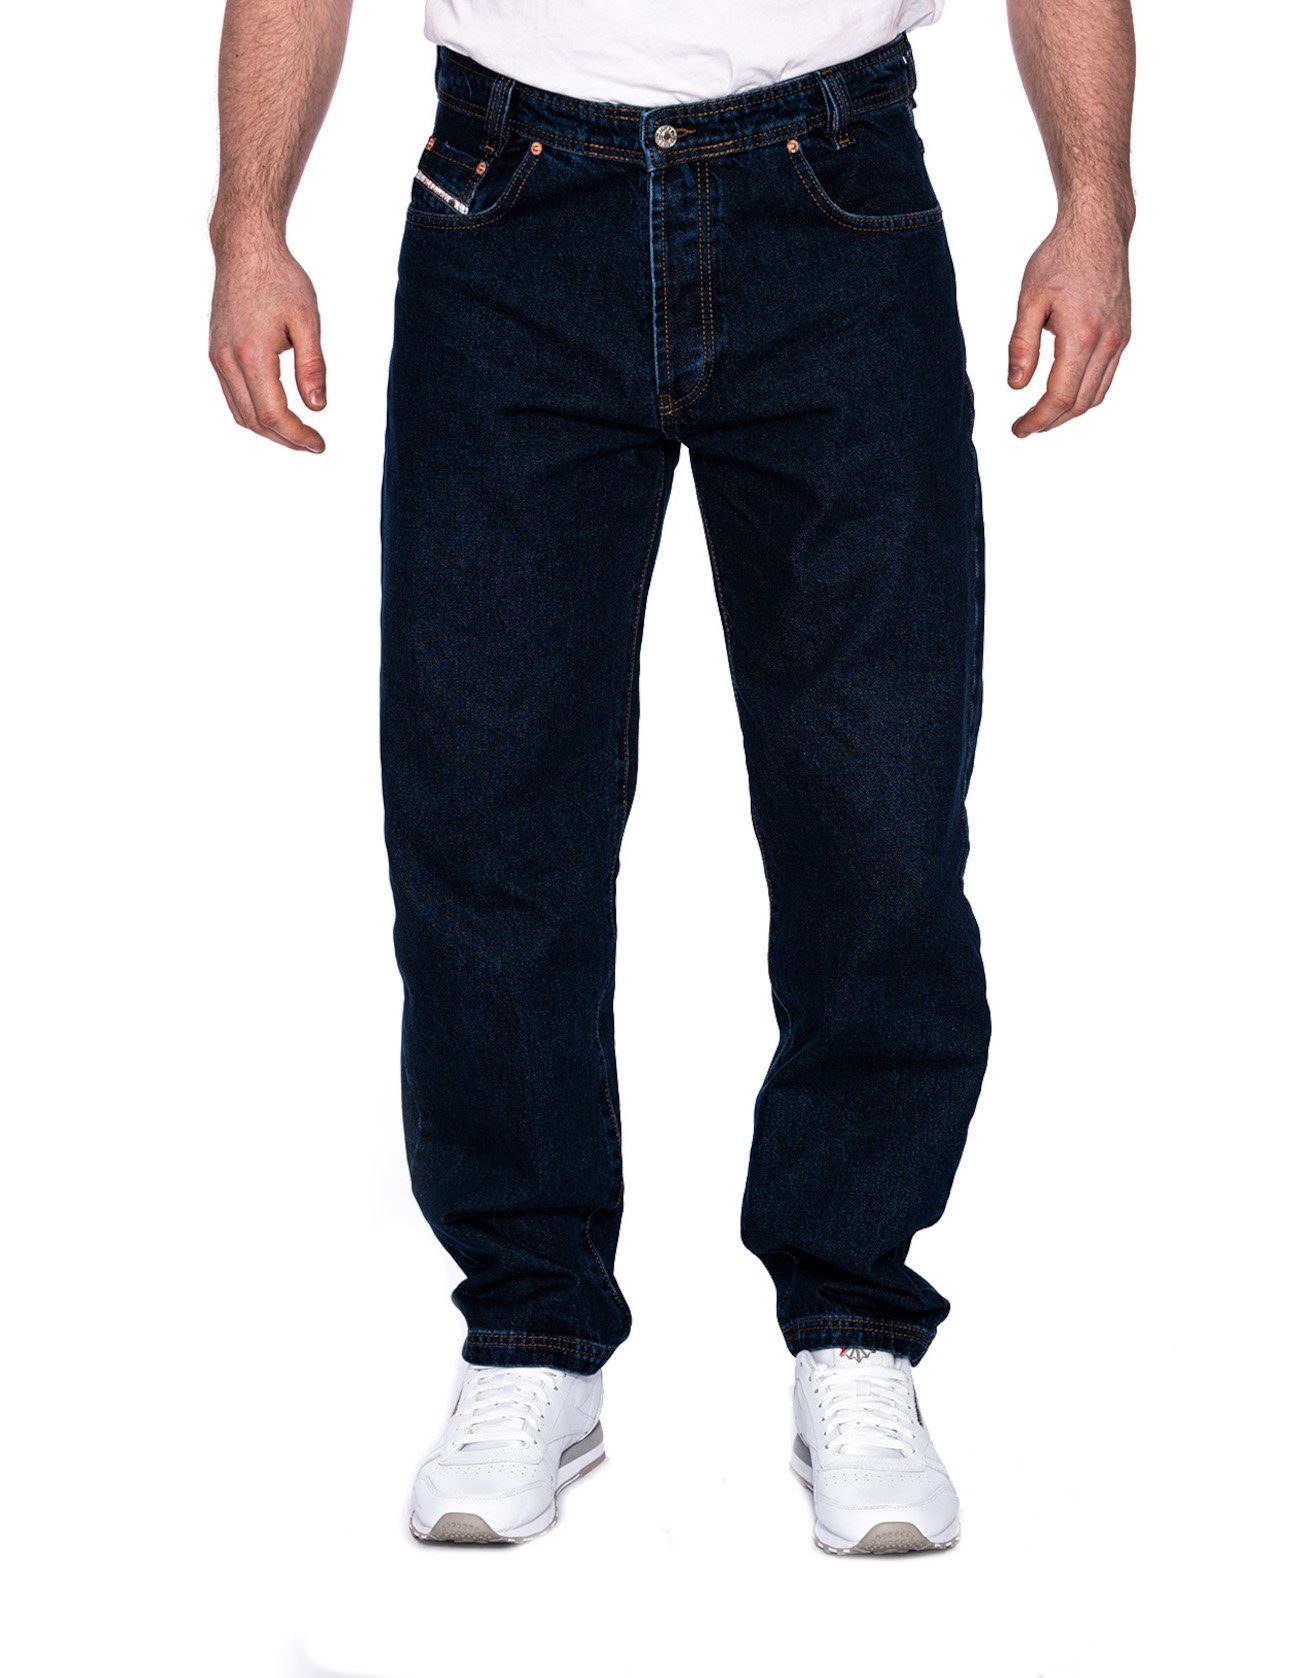 PICALDI Jeans Weite Jeans Zicco 472 Loose Fit, Relaxed Fit El Patron